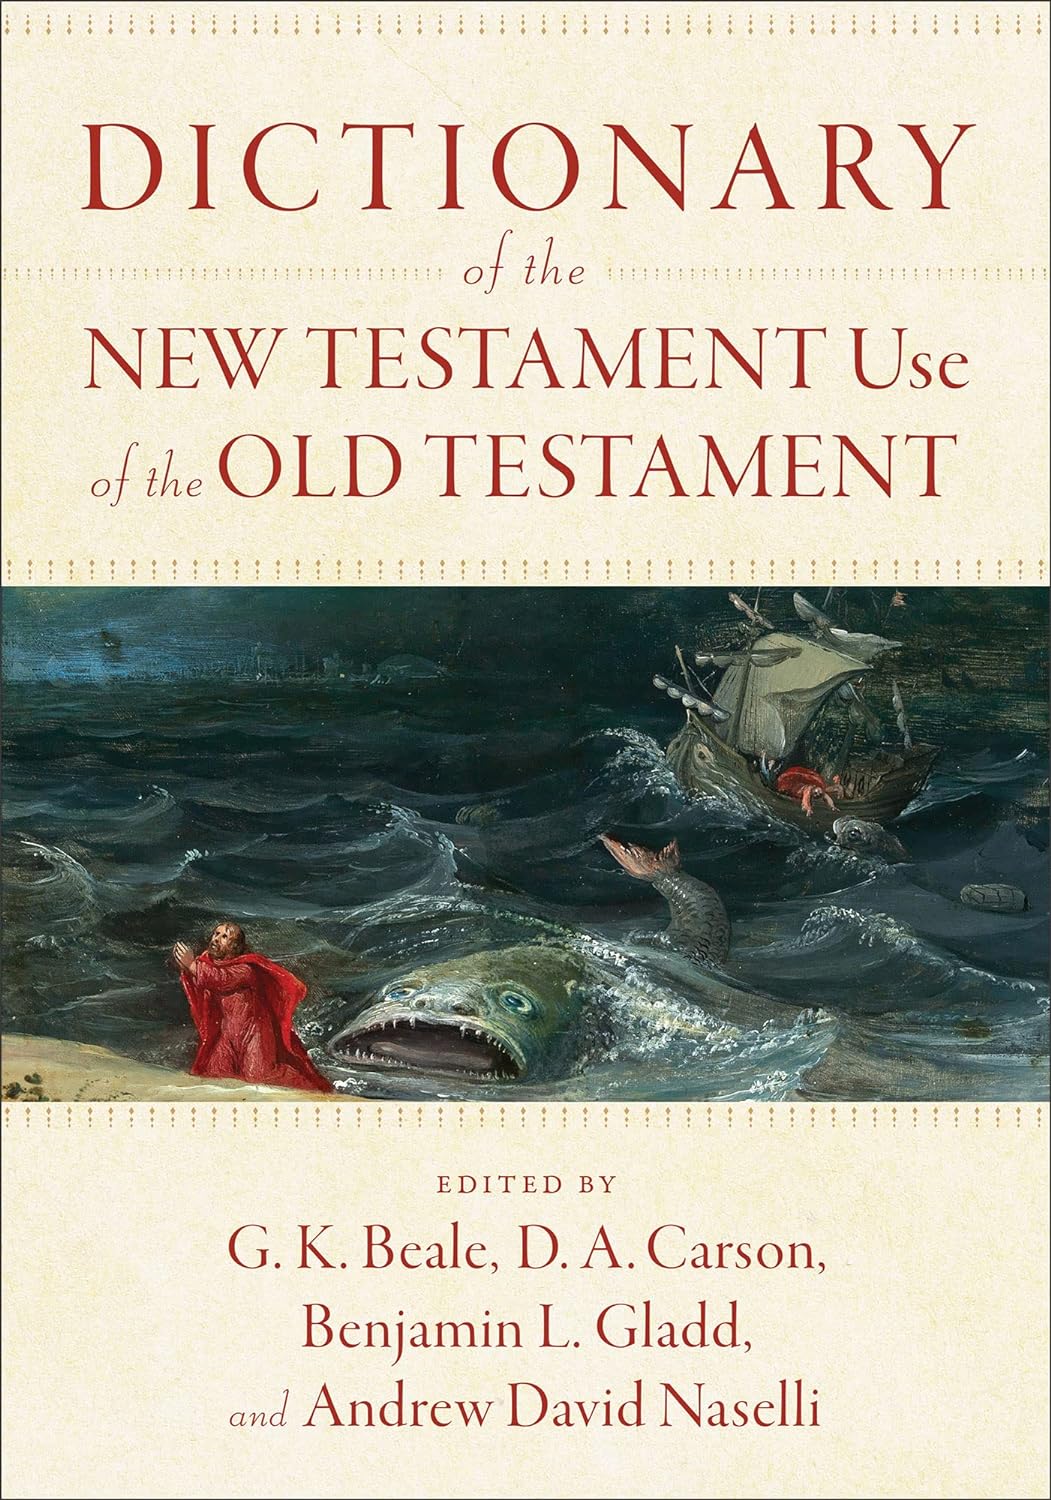 Dictionary of the New Testament Use of the Old Testament: Beale, G.K., Carson, D.A., Gladd, Benjamin L., Naselli, Andrew: 9781540960047 : Amazon.com: Books